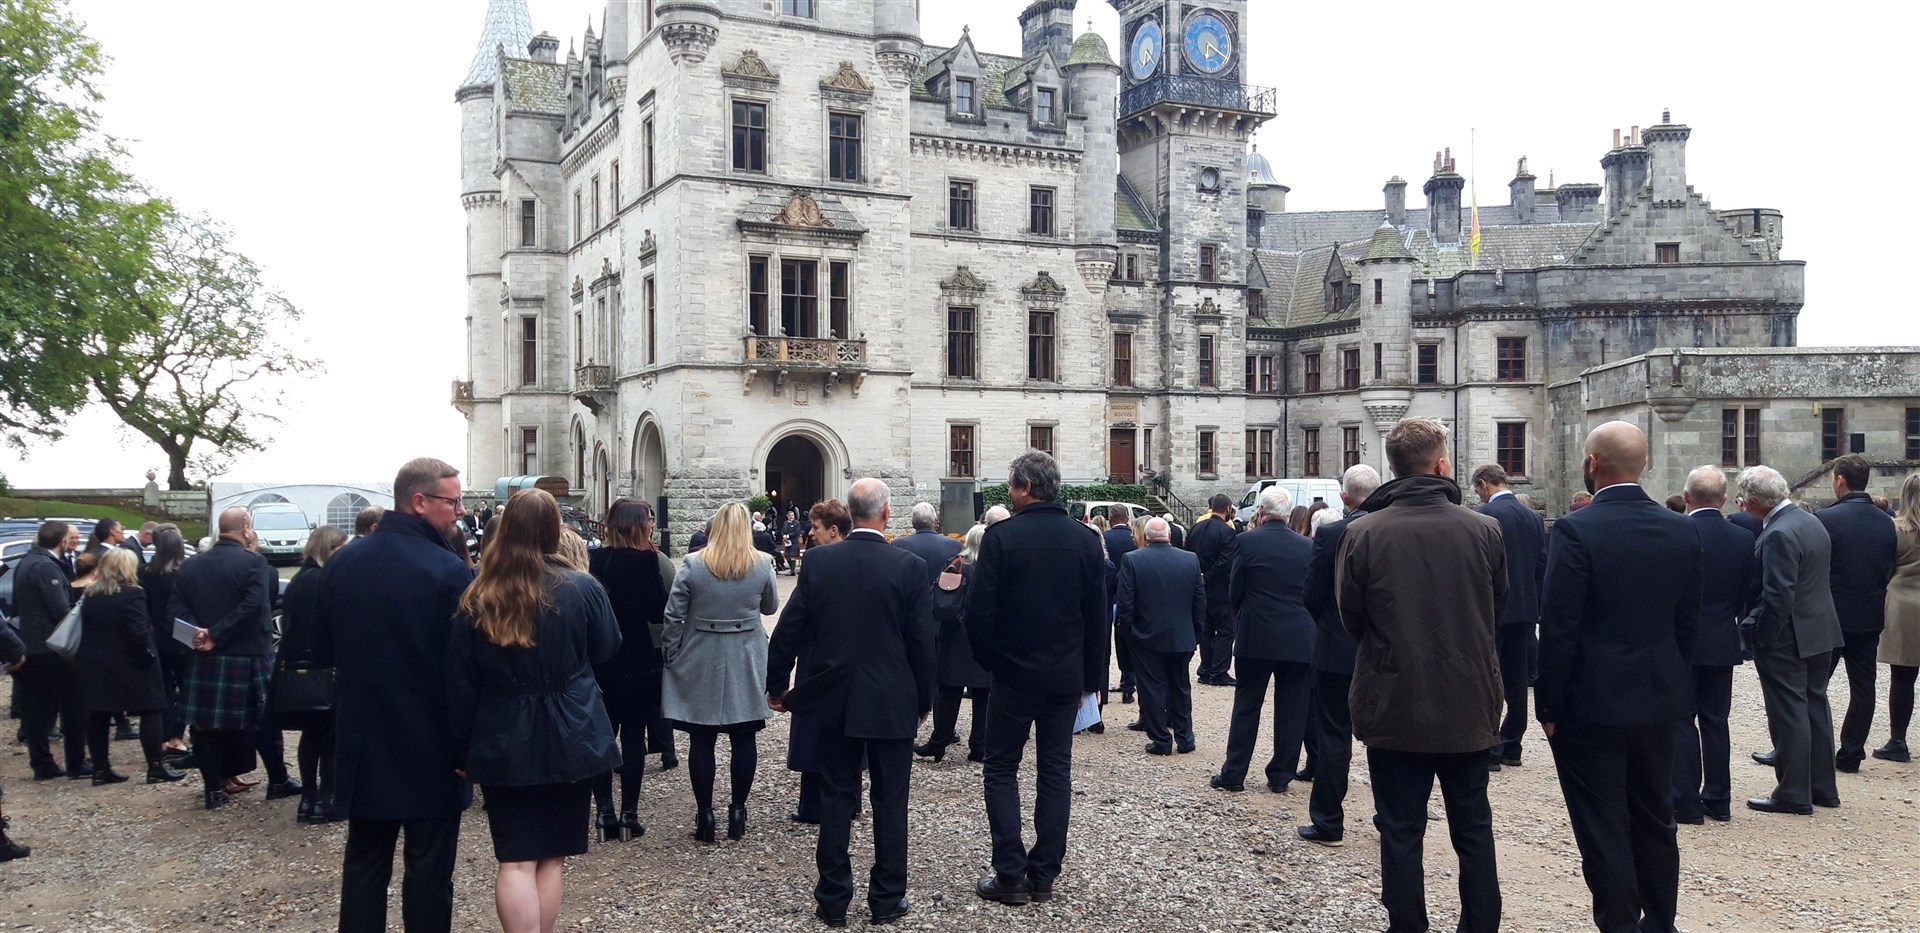 The outdoor service was held on the esplanade at Dunrobin Castle.